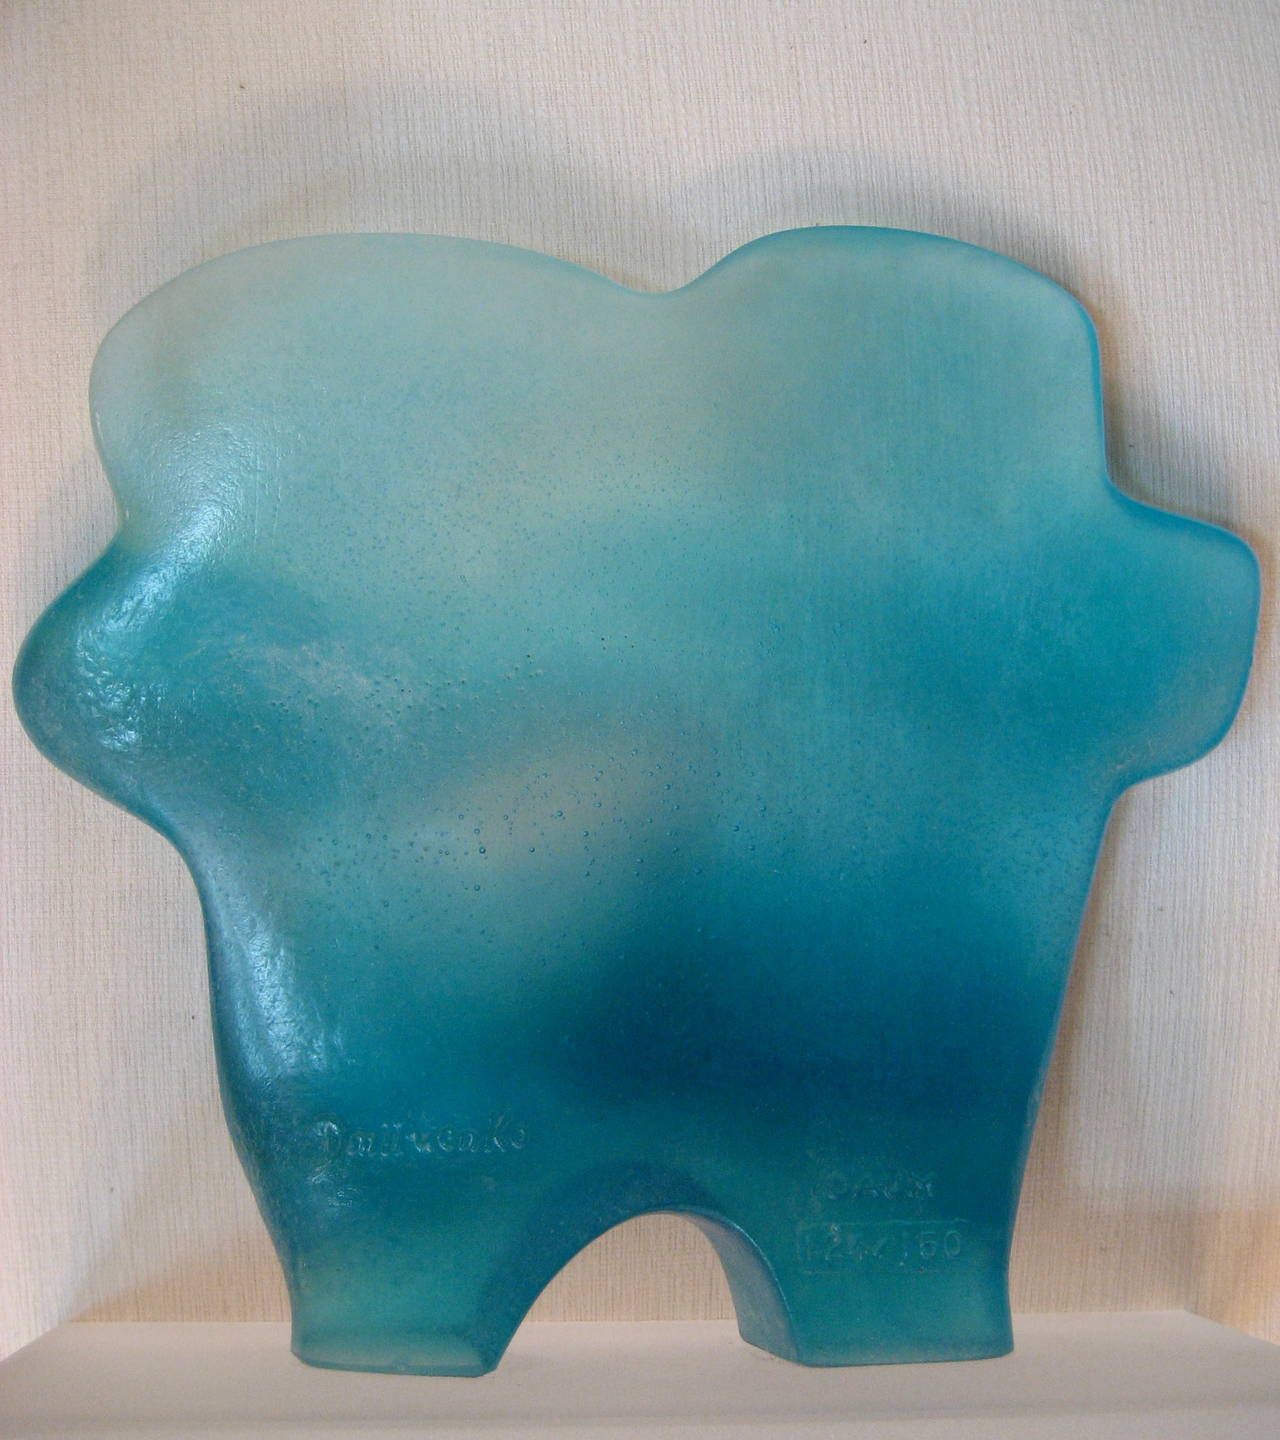 Pierre Dmitrienko, French painter and sculptor, 1925-1974, created in 1968 three sculptures for Daum
Le Couple, Le Cri and L'Ombre du Couple.
Glass pâte de verre blue-turquoise color
numbered 124 on a limited edition of 150.
Double signature